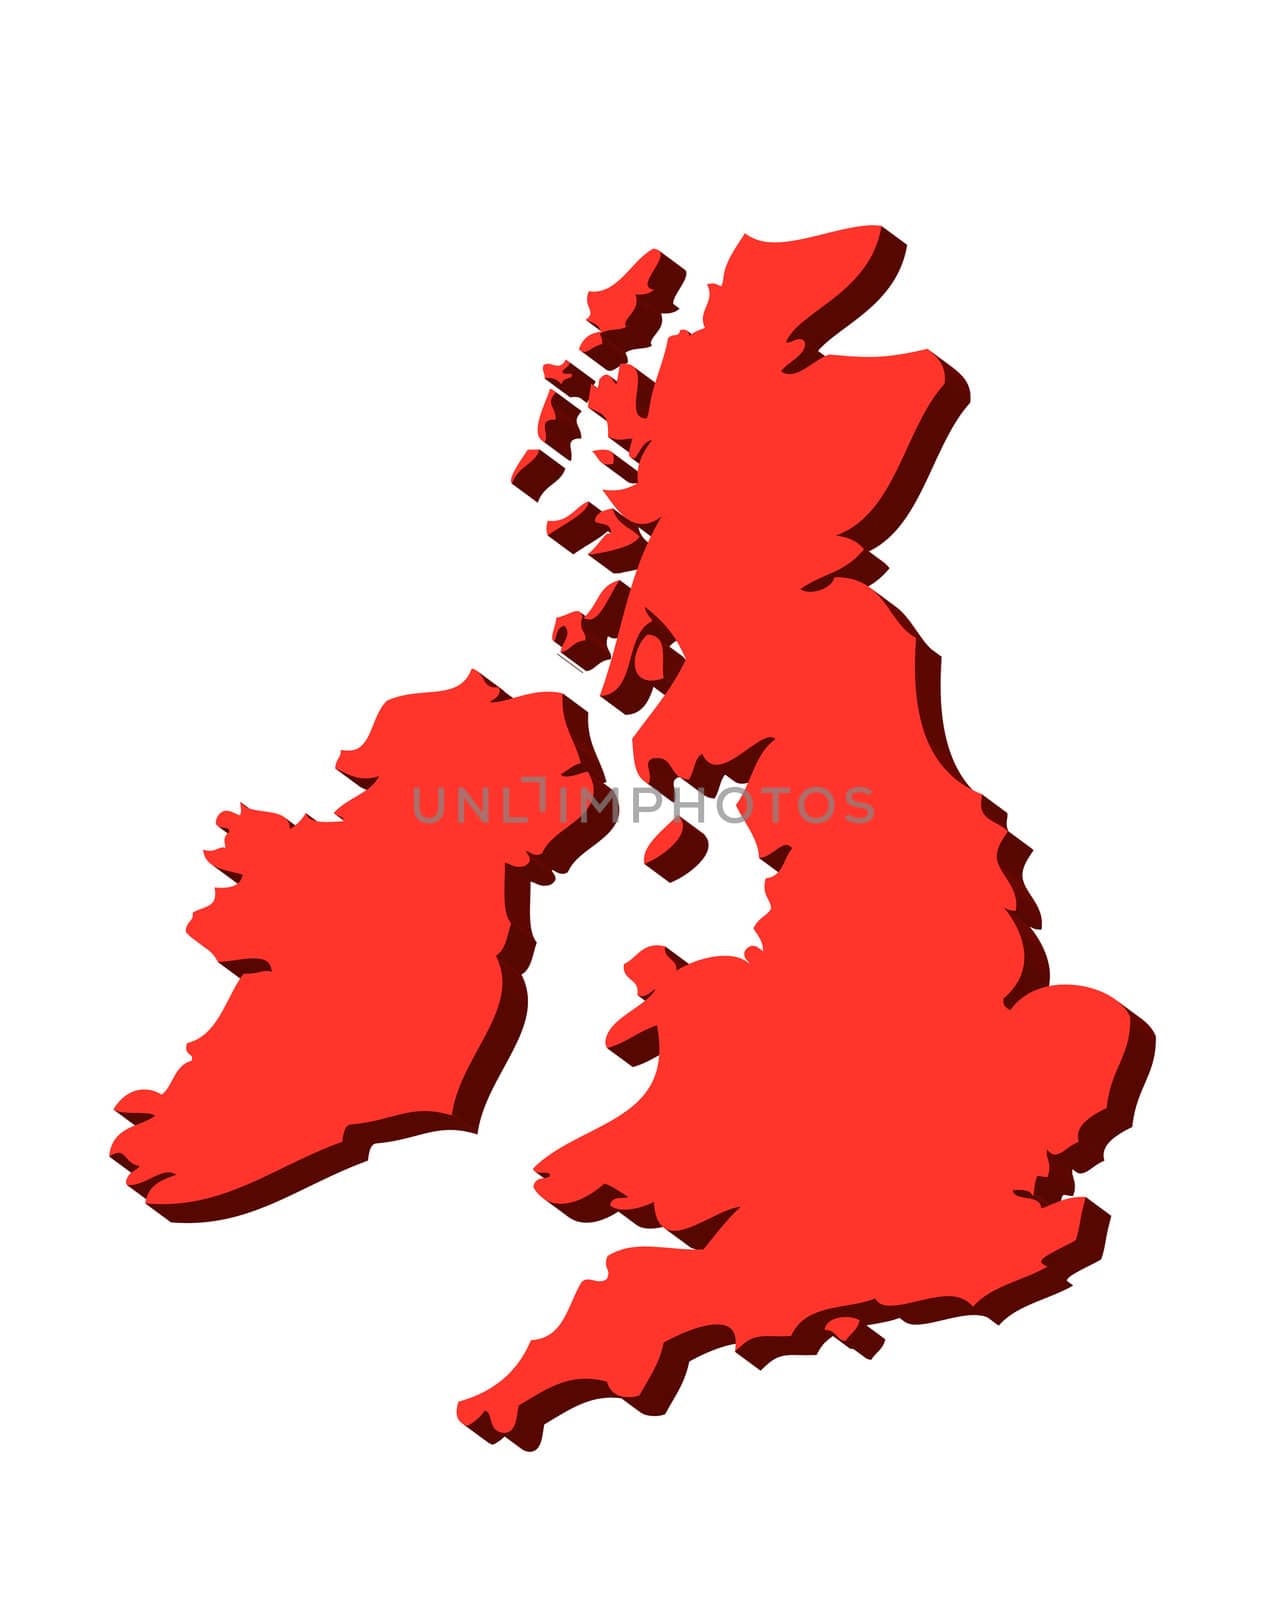 UK and Ireland map by yorkman